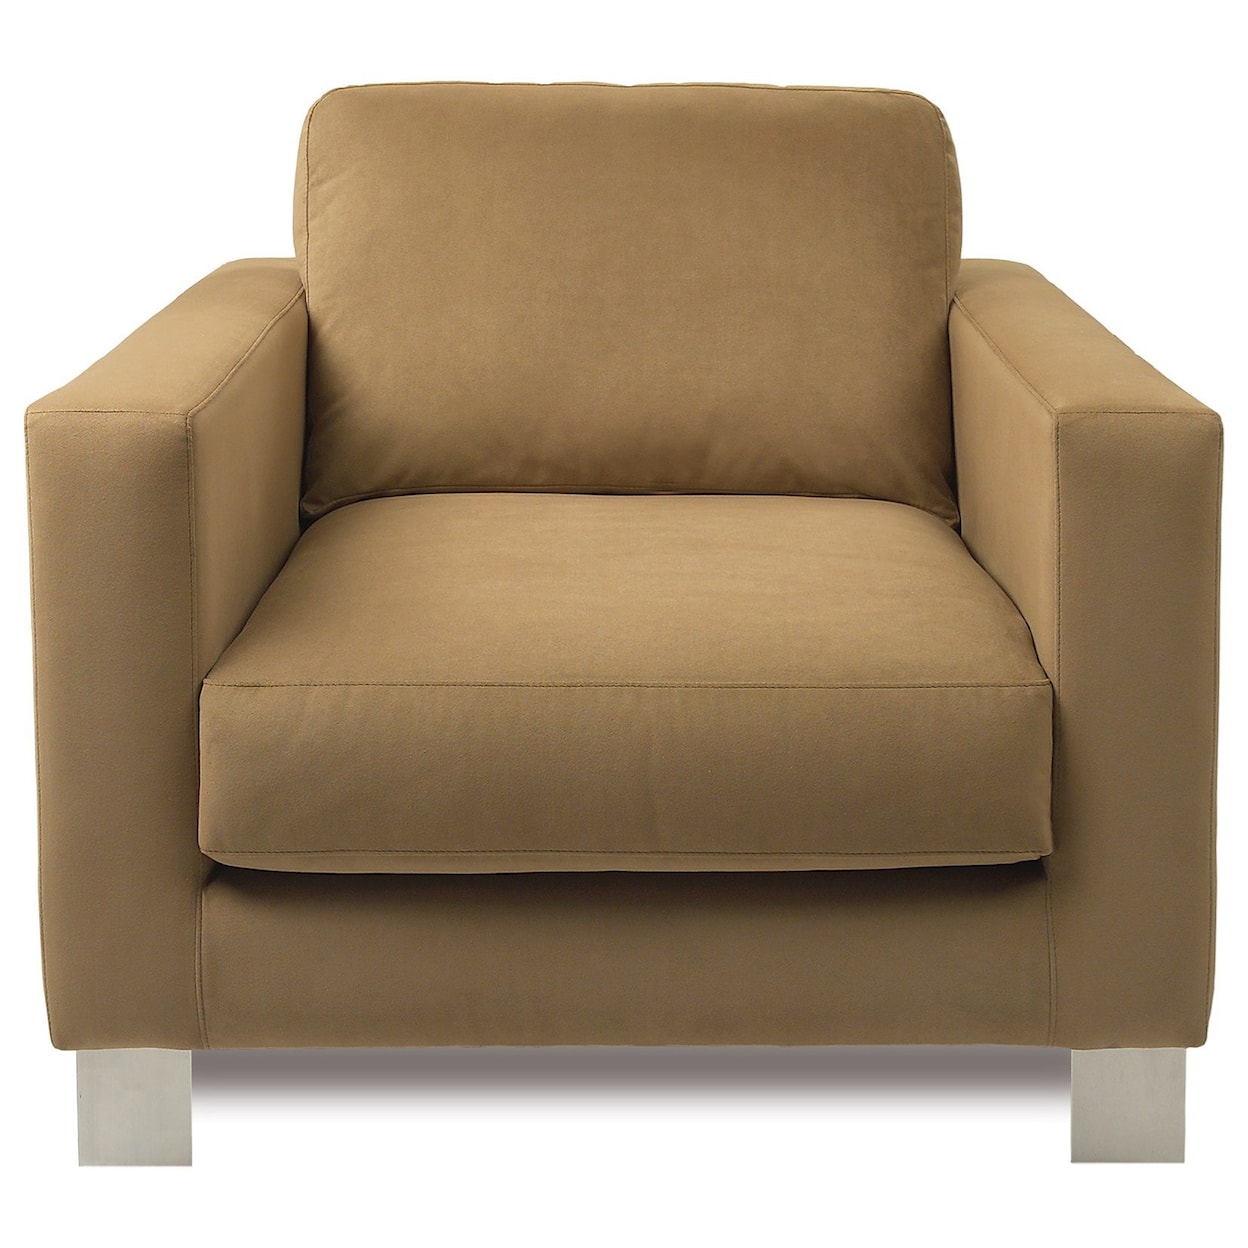 American Leather Alessandro Upholstered Chair